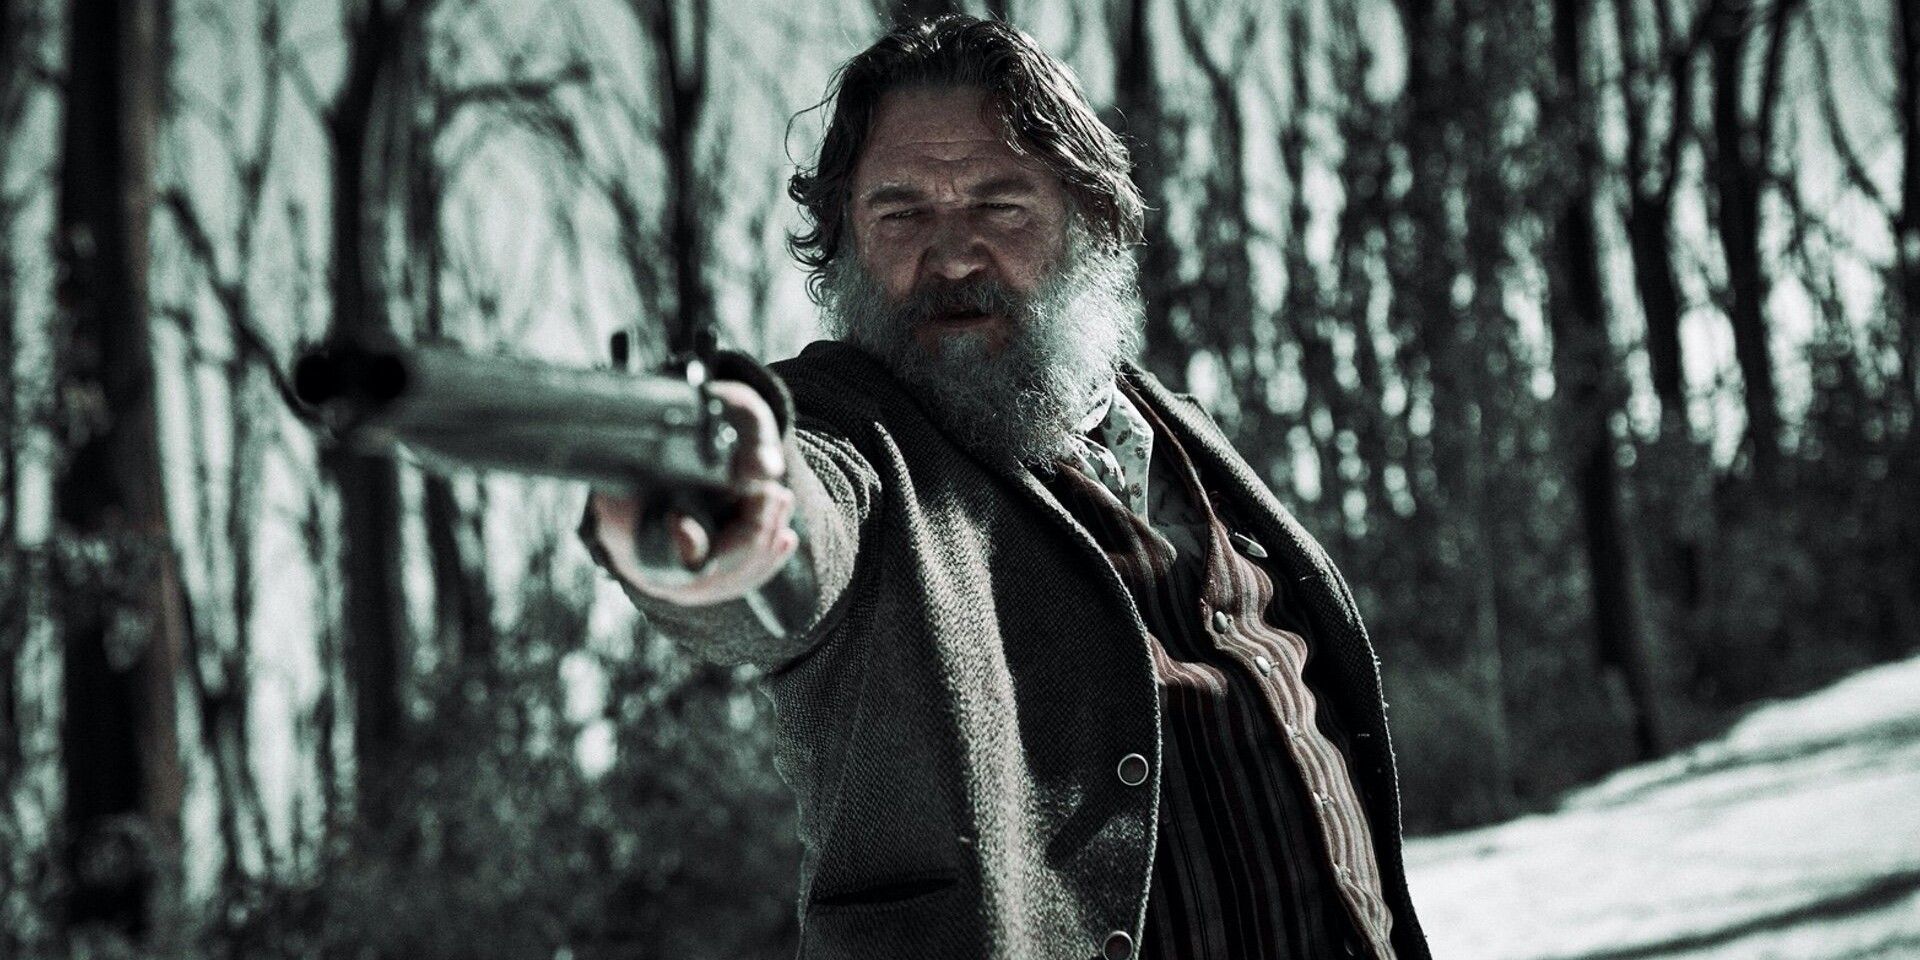 Russell Crowe in True History of the Kelly Gang